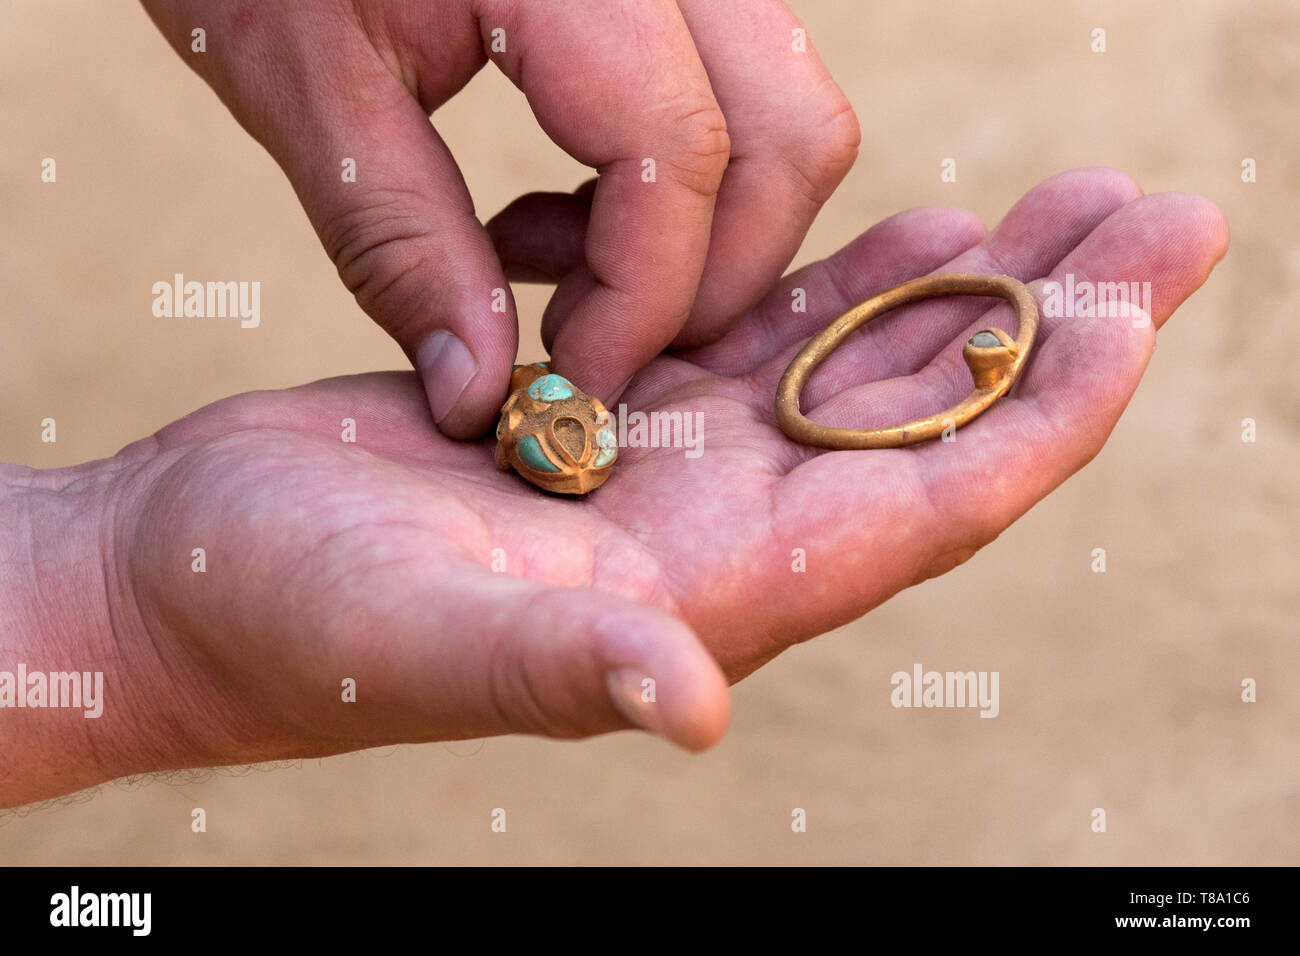 Sarmatians golden jewelry founded durning Archaeological excavations of the Sarmatians burials in Astrakhan, Russia. Stock Photo